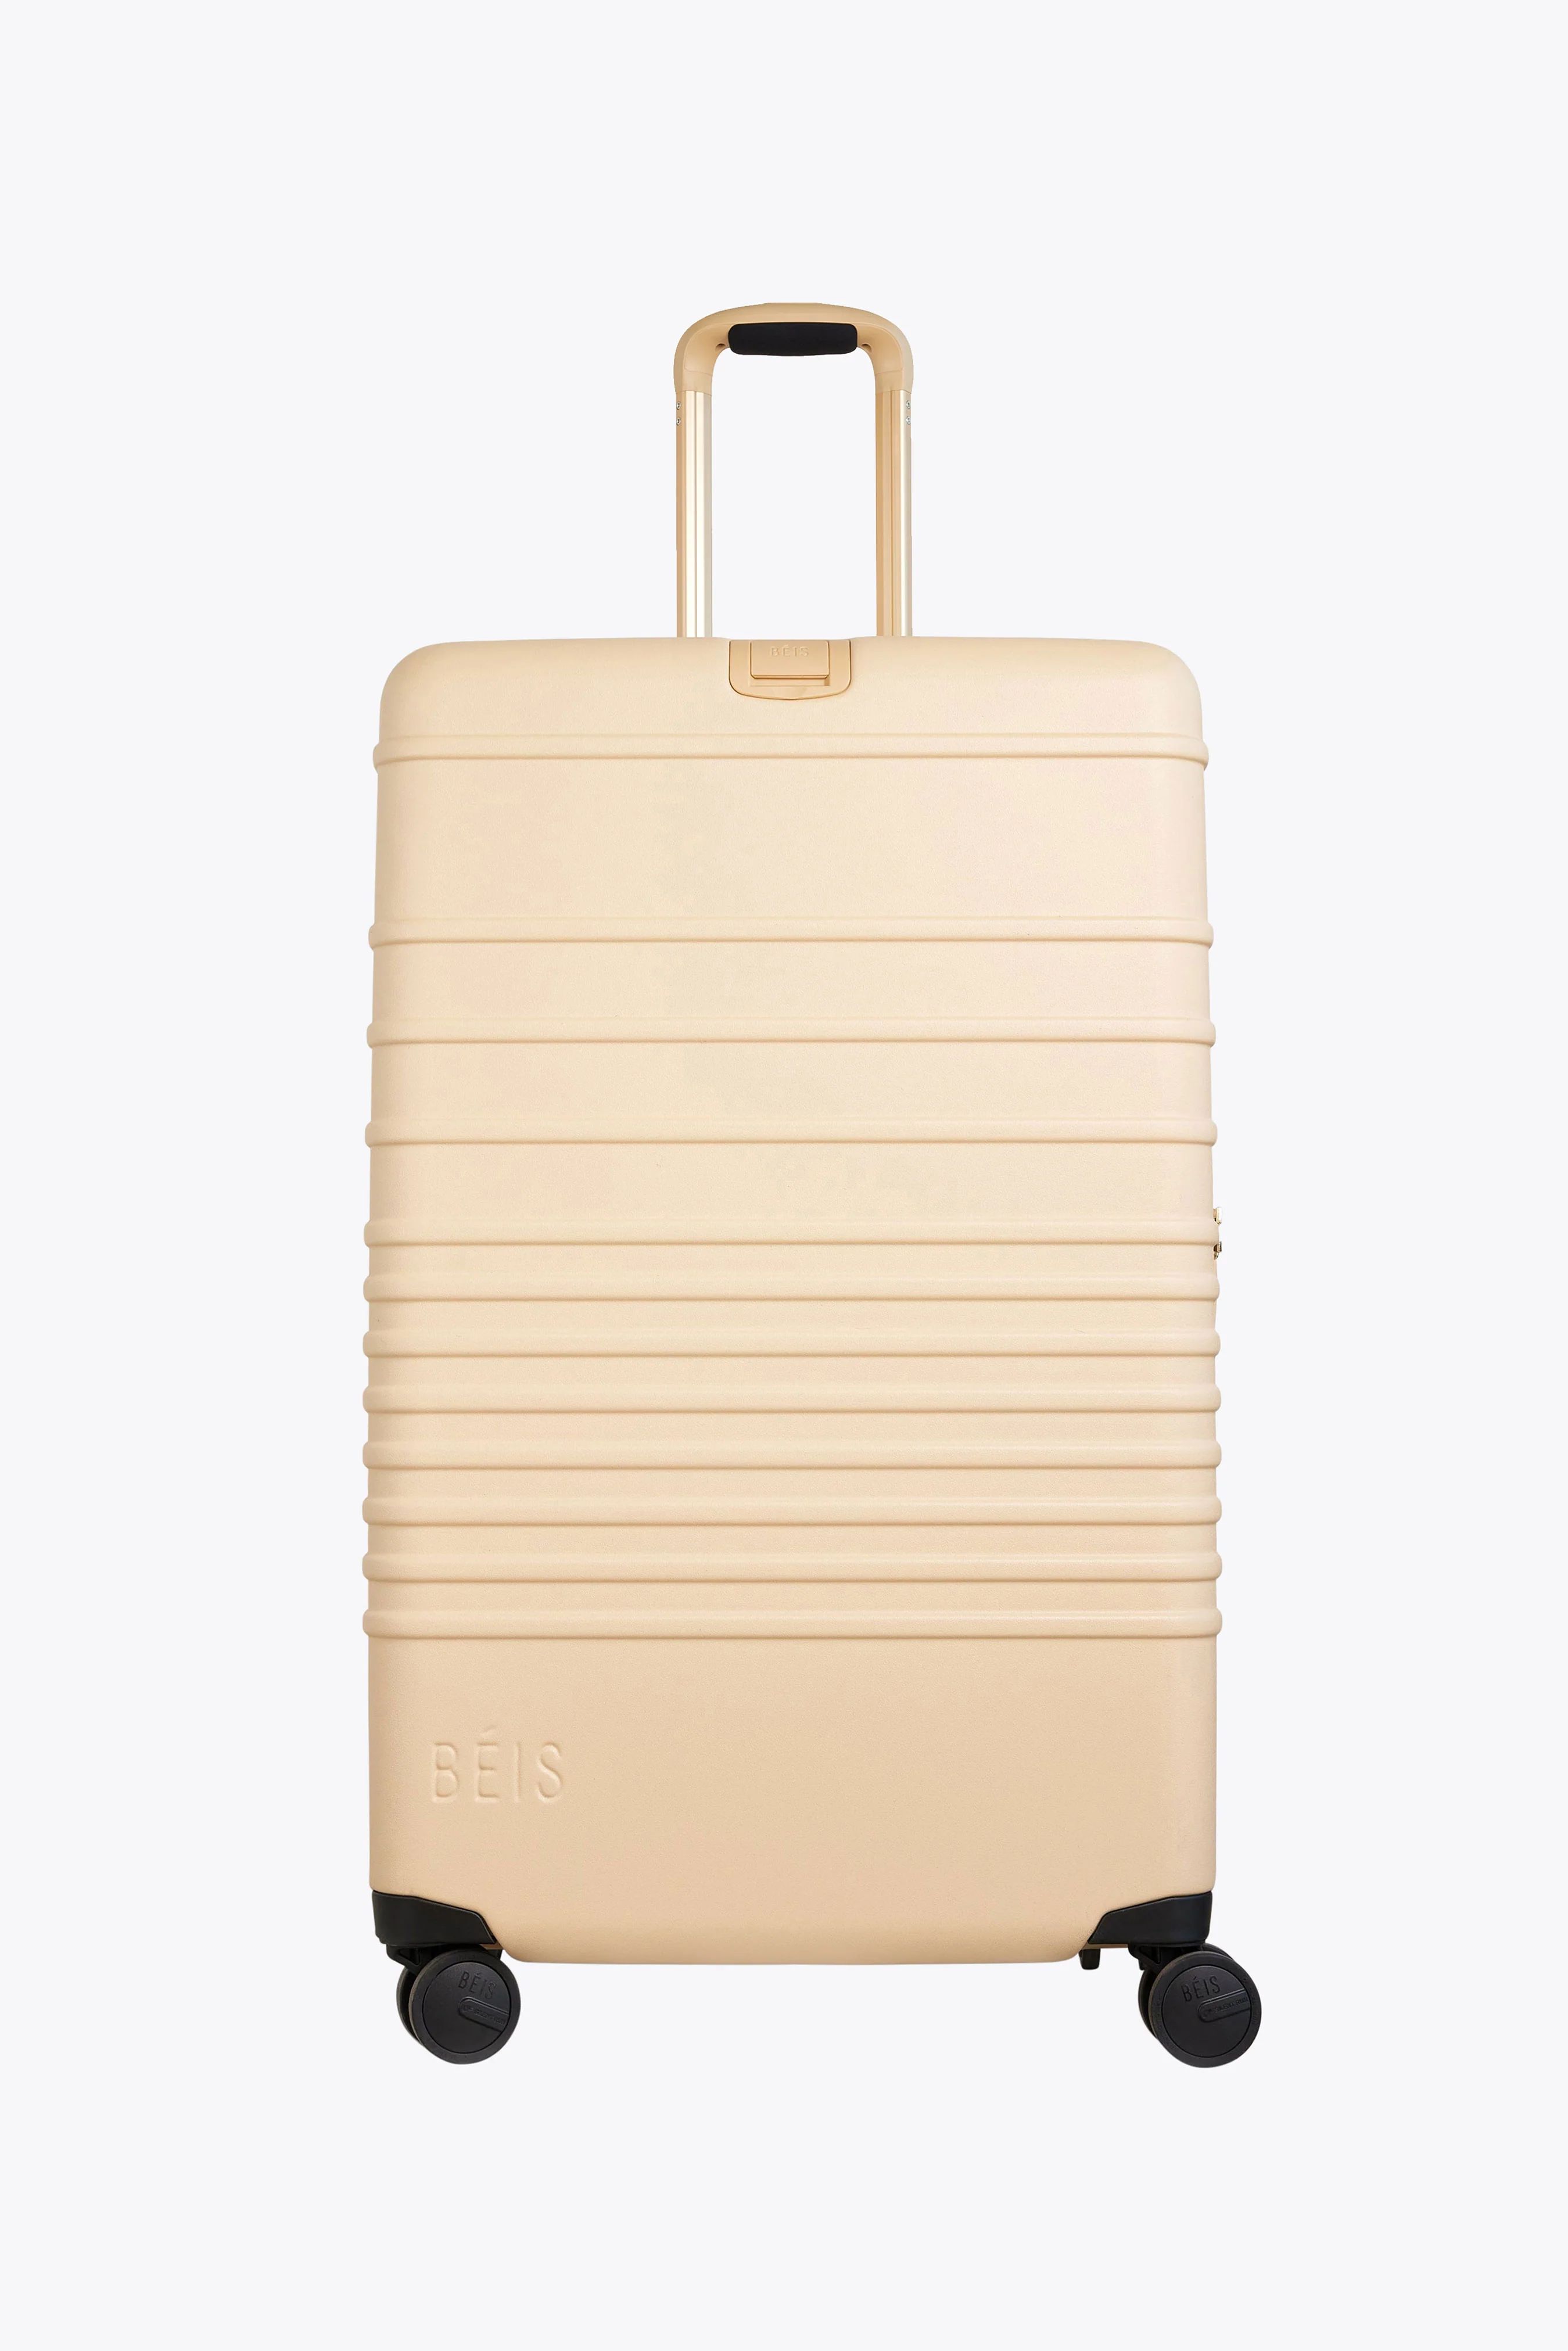 The Large Check-In Roller in Beige | BÉIS Travel